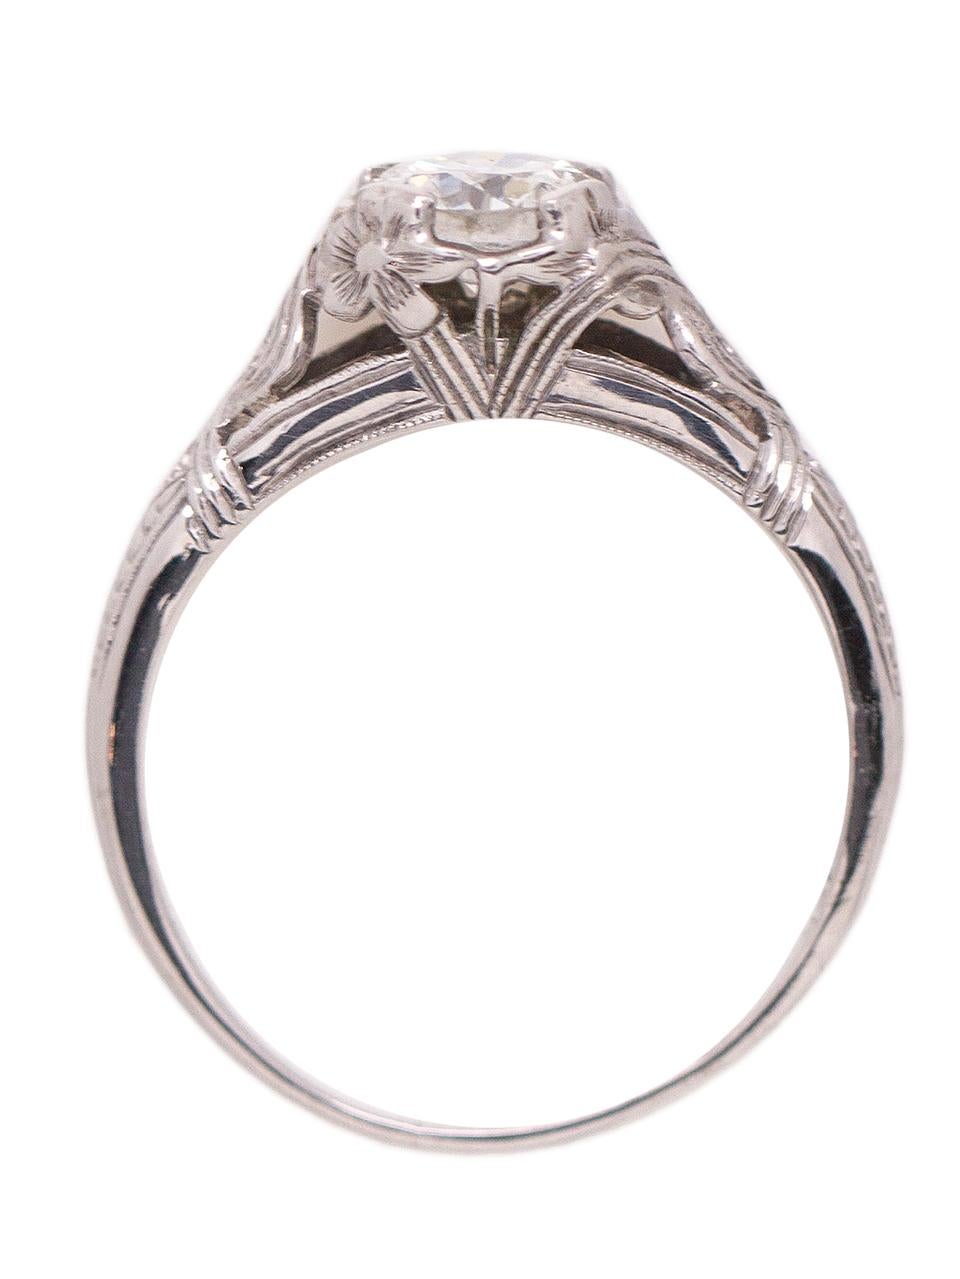 Lovely vintage 18k white gold diamond engagement ring featuring a stunningly bright 0.72ct Old European Cut center stone, H-VS1, set in a beautifully detailed hand pierced woven floral design setting dating from the 1920s. Classic wheat pattern